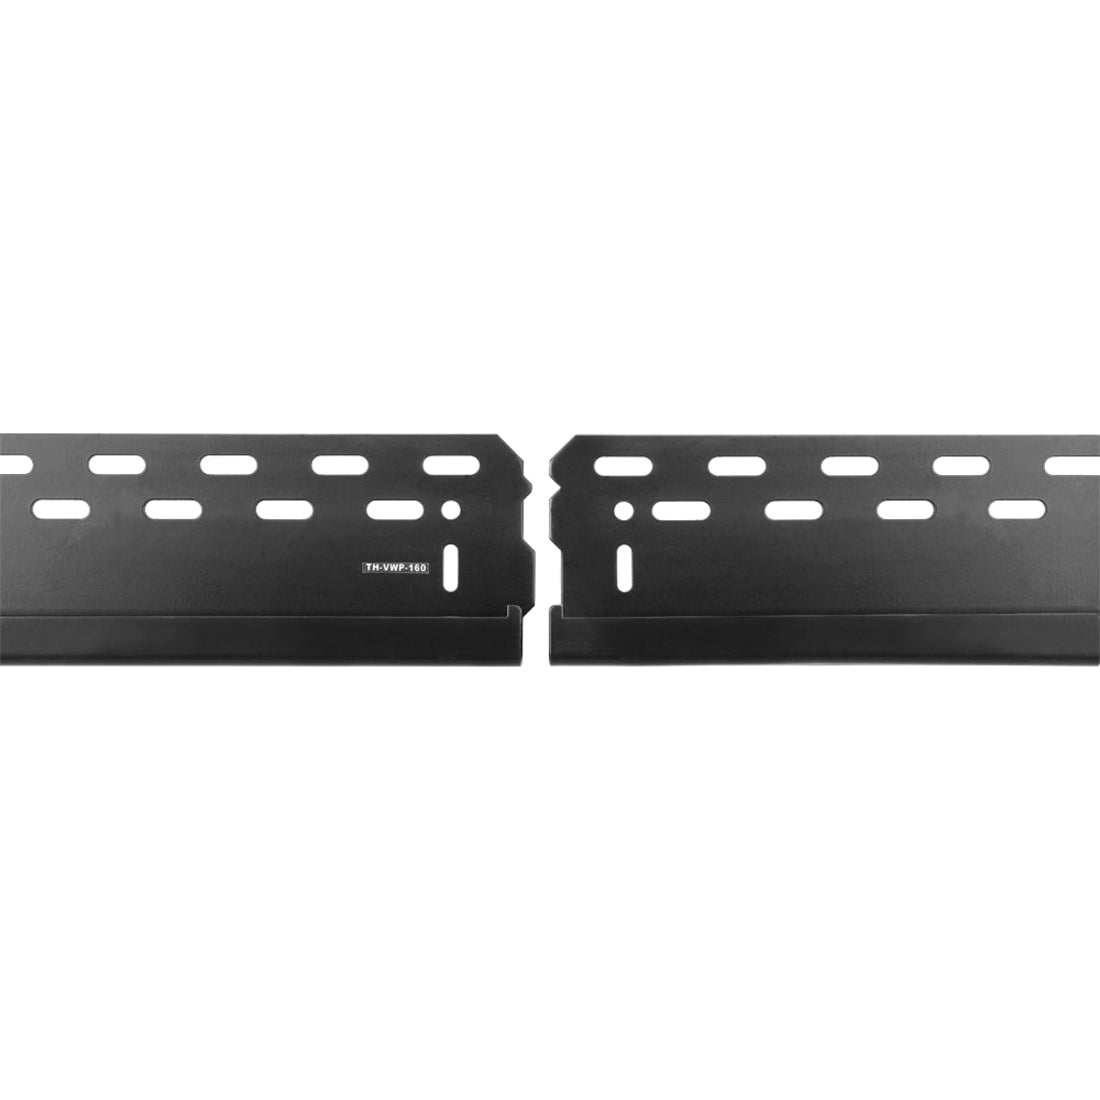 Atdec ADWS-3X2F-320-W 3 x 2 Video Wall Mount for 49" to 60" Displays, Wall Fixed